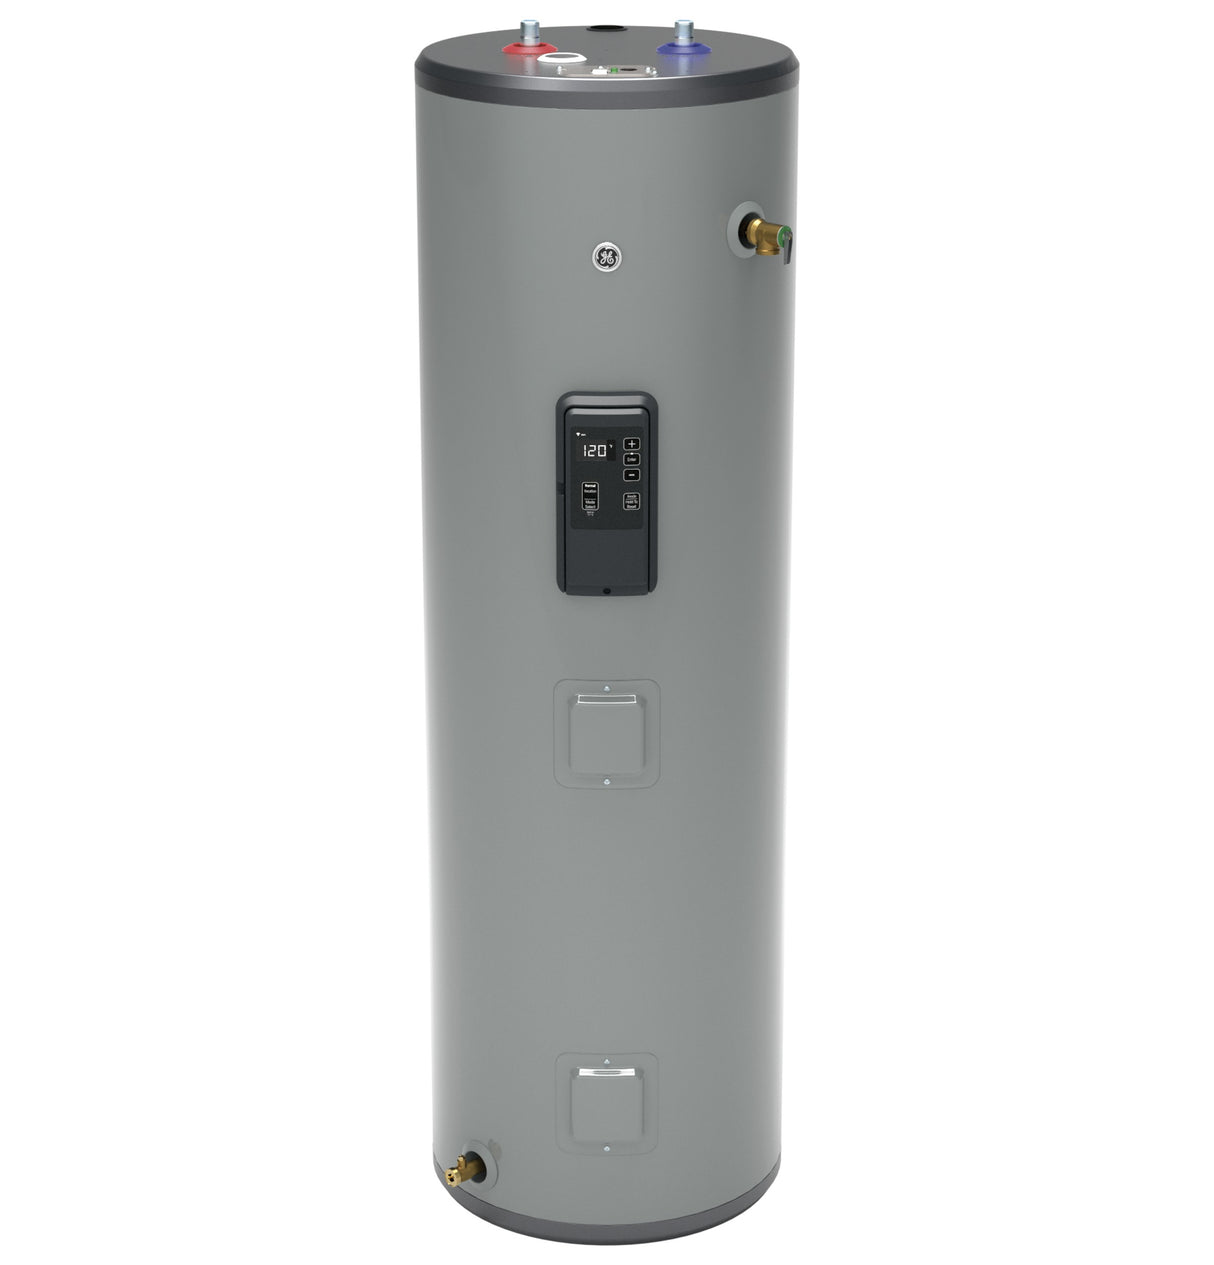 GE(R) Smart 40 Gallon Tall Electric Water Heater - (GE40T12BLM)